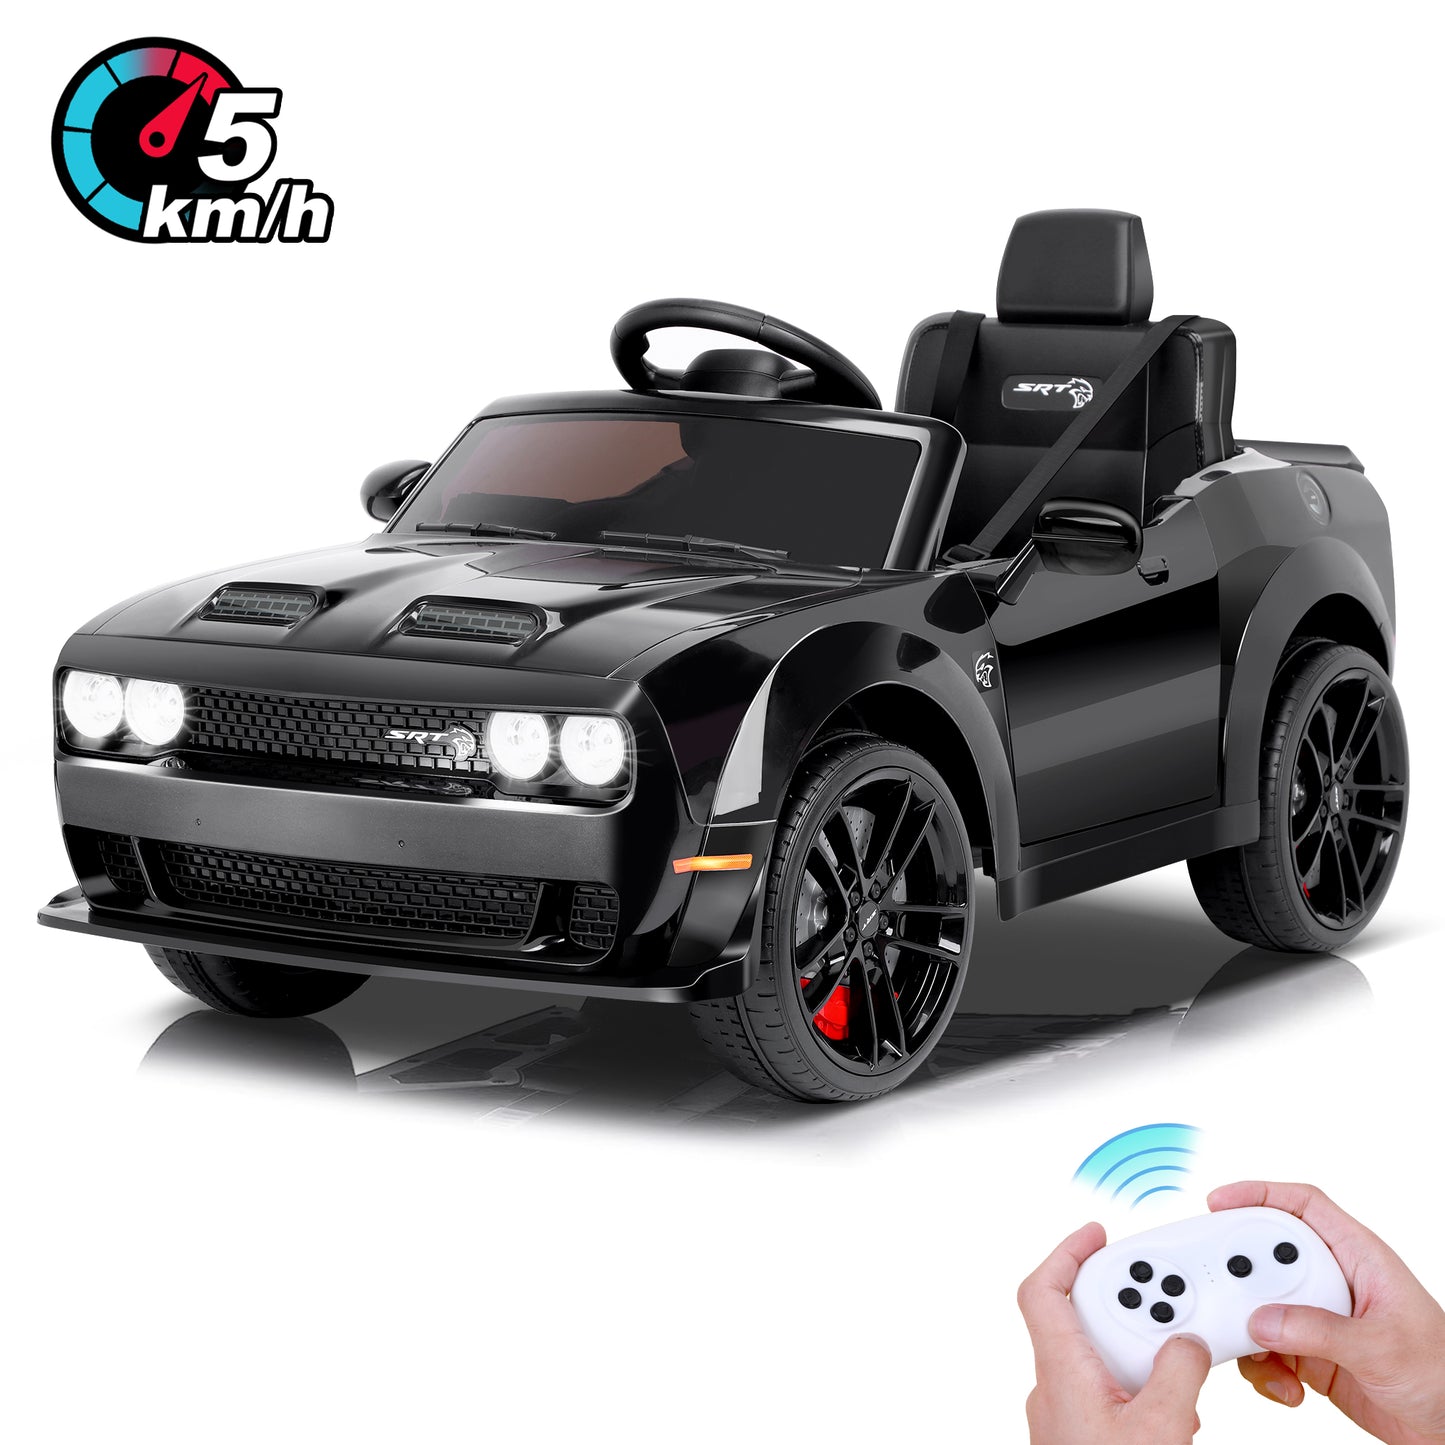 Dodge Challenger SRT Kids Ride on Car,Wisairt 12 V Battery Powered Electric Vehicle w/ Remote Control,Bluetooth,LED Lights